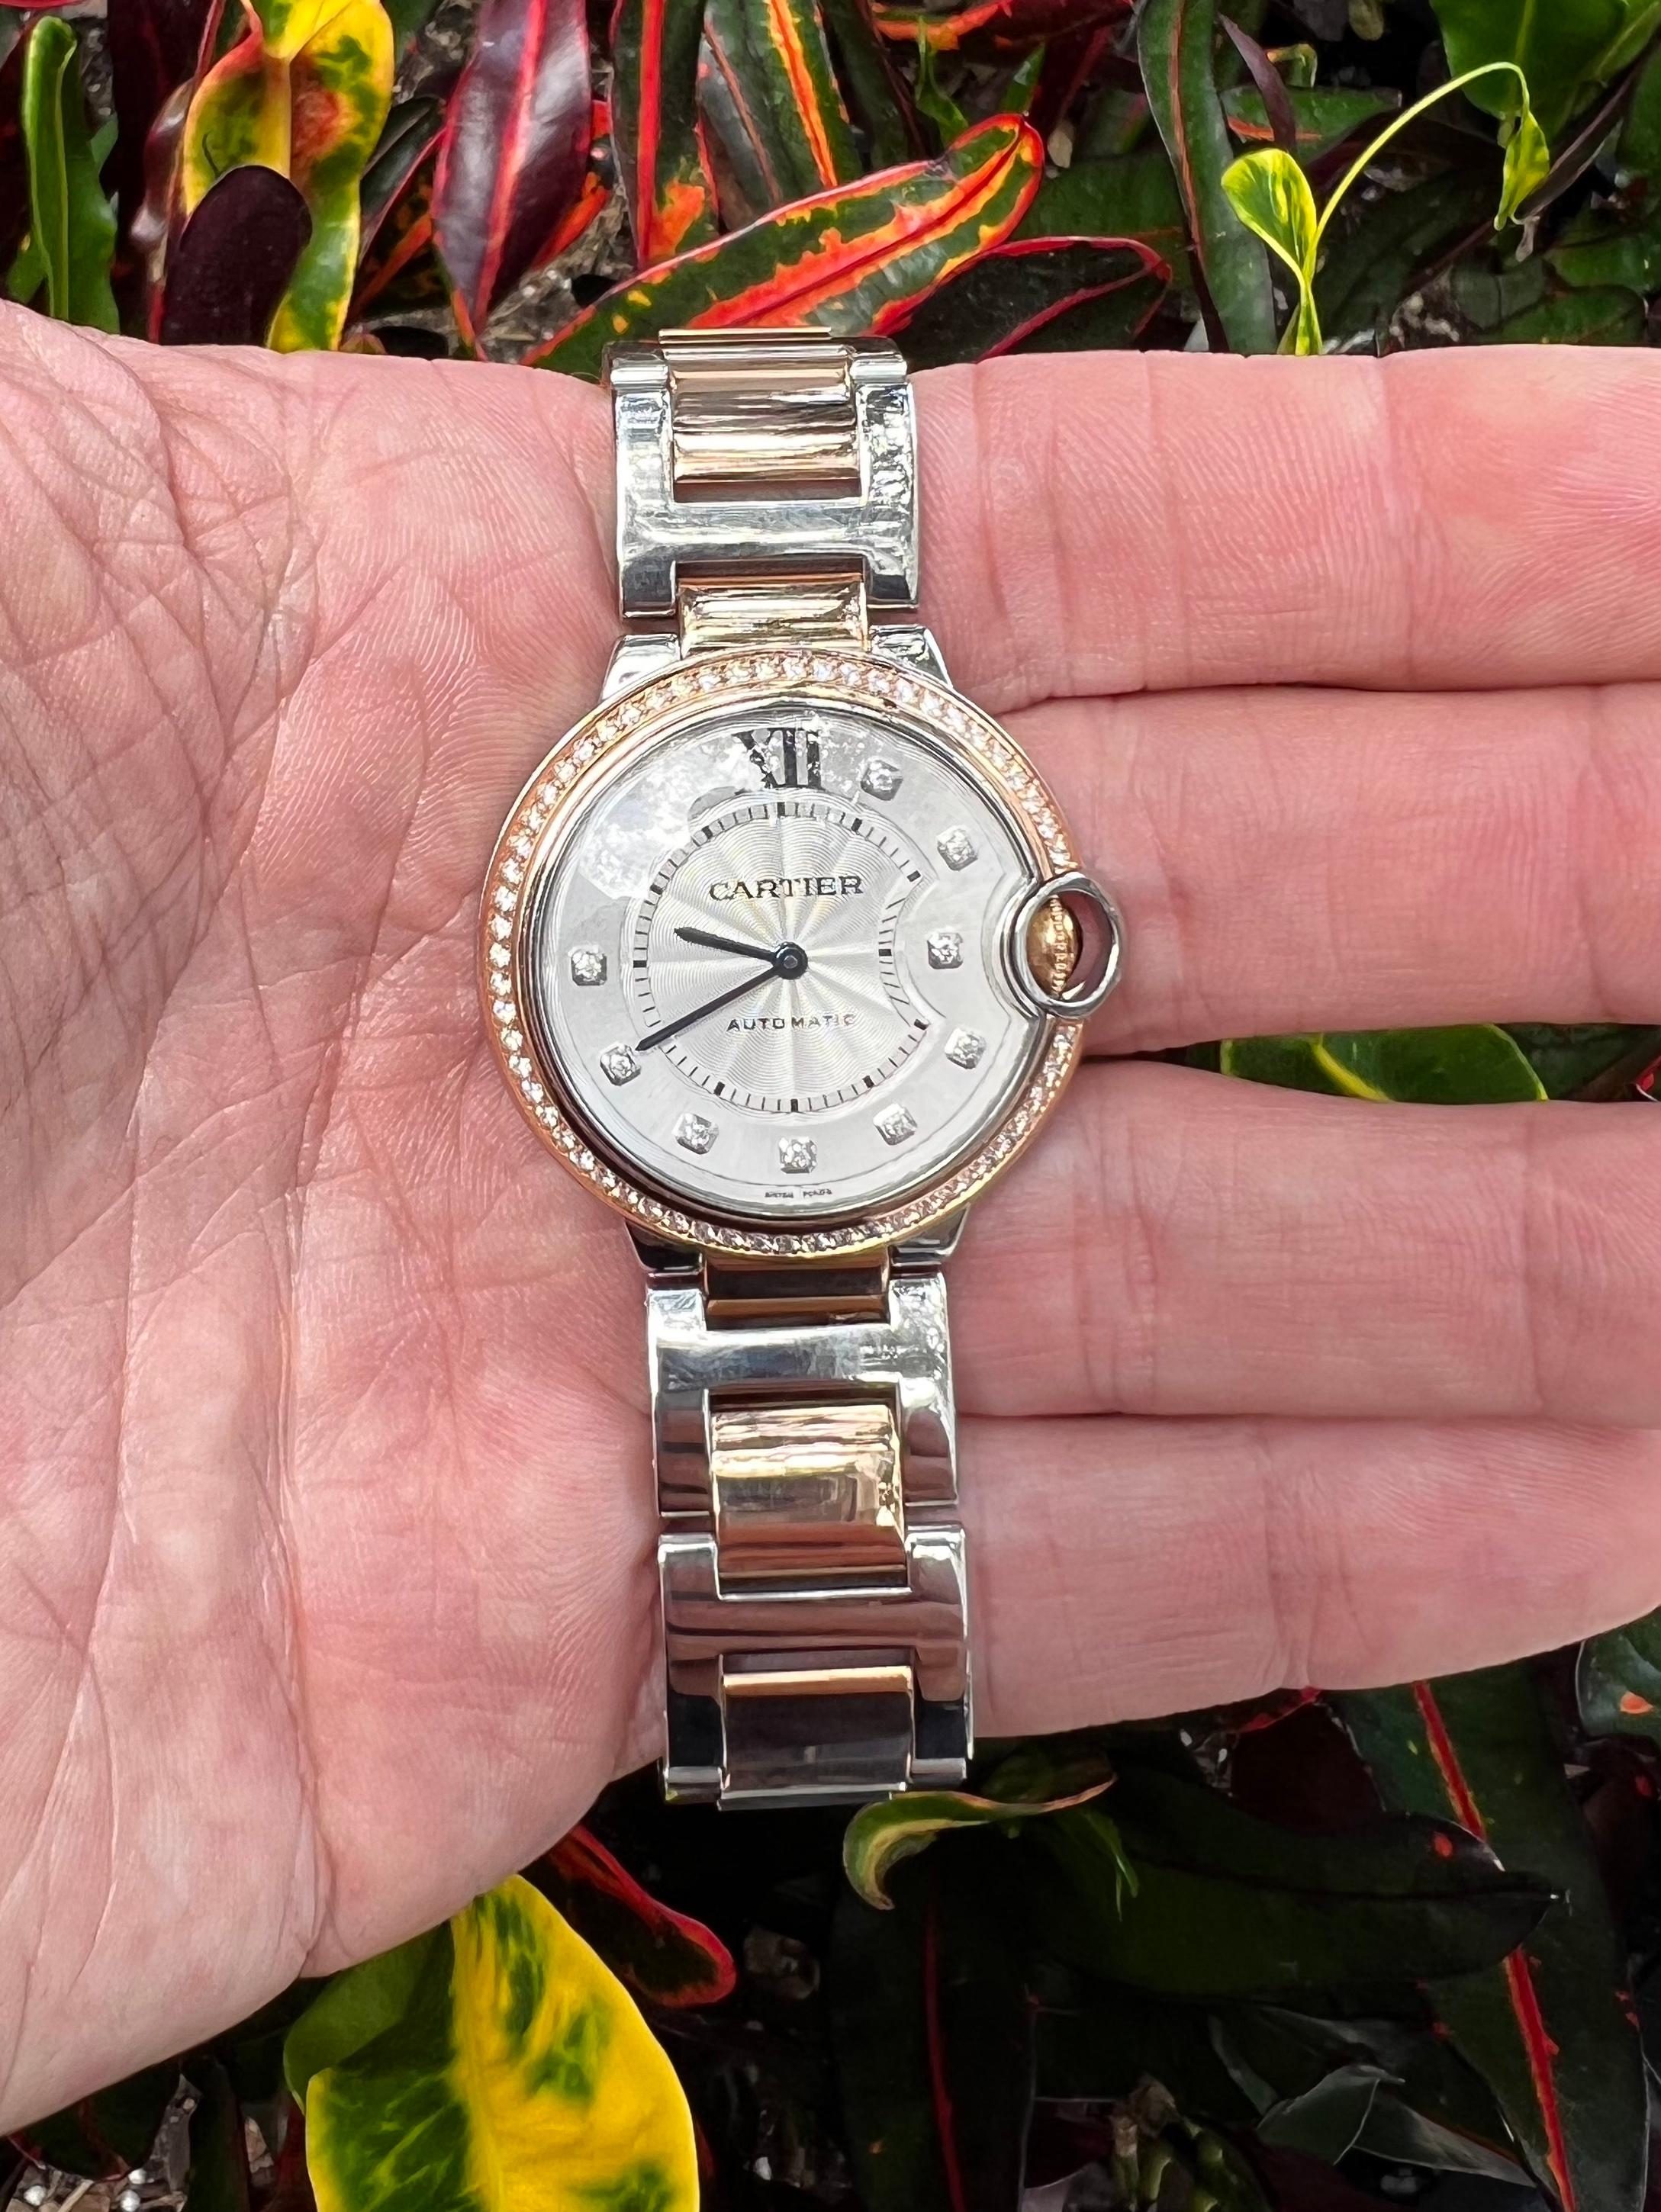 Beautiful Cartier Ballon Bleu wrist watch crafted in stainless steel and 18k rose gold. The watch is a 36 mm and set with factory round brilliant cut diamonds from Cartier. The watch has been fully serviced and polished by our in house jeweler. You